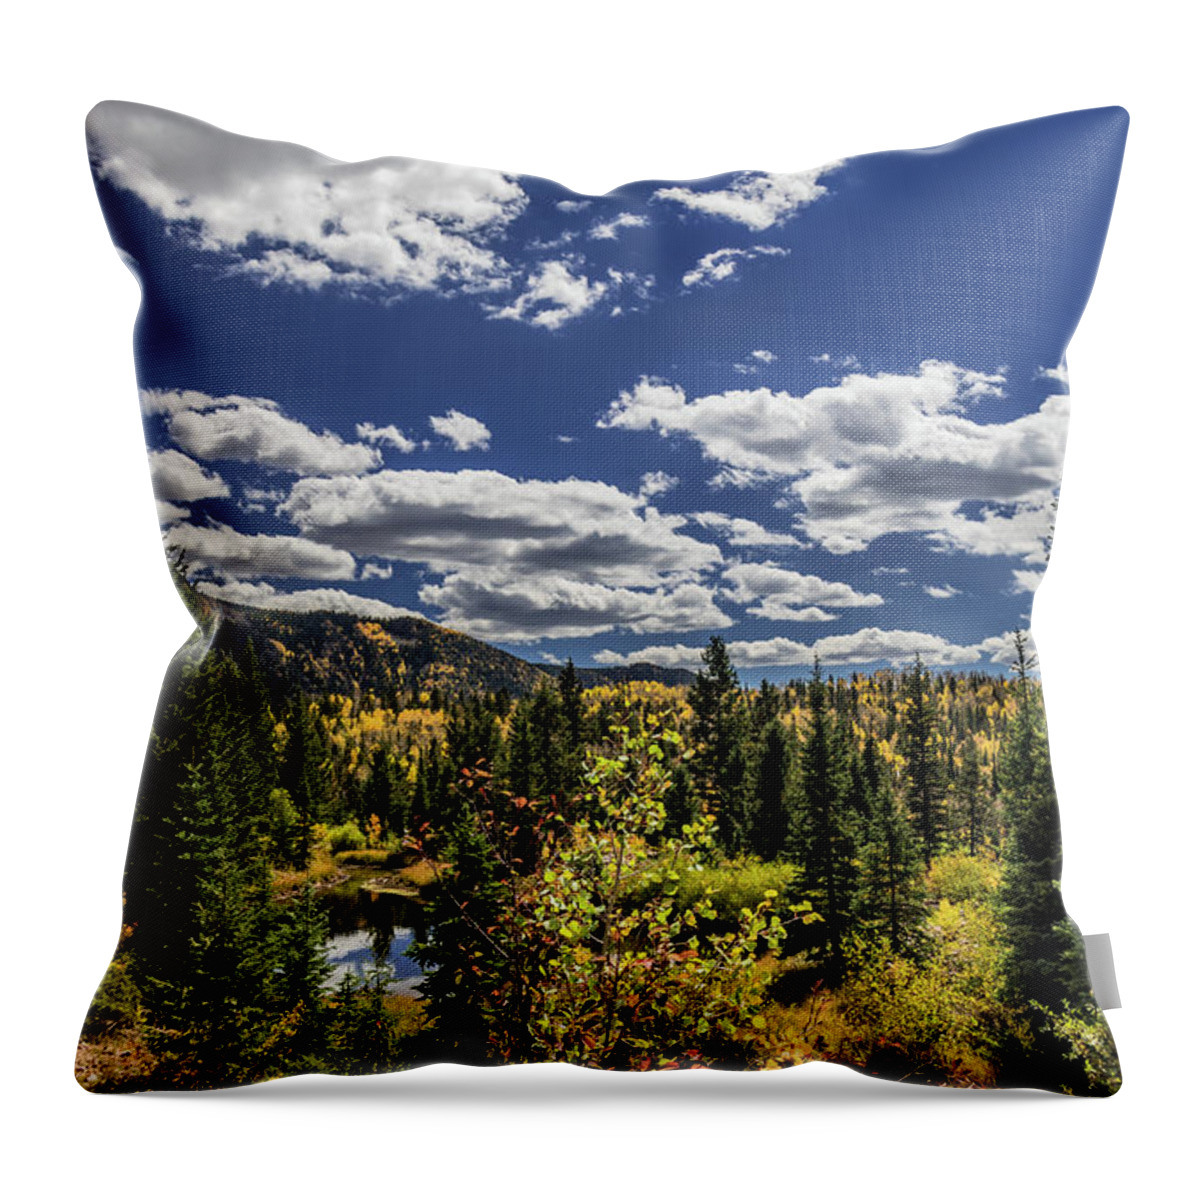 2018 Throw Pillow featuring the photograph Golden Leaves by Dennis Dempsie